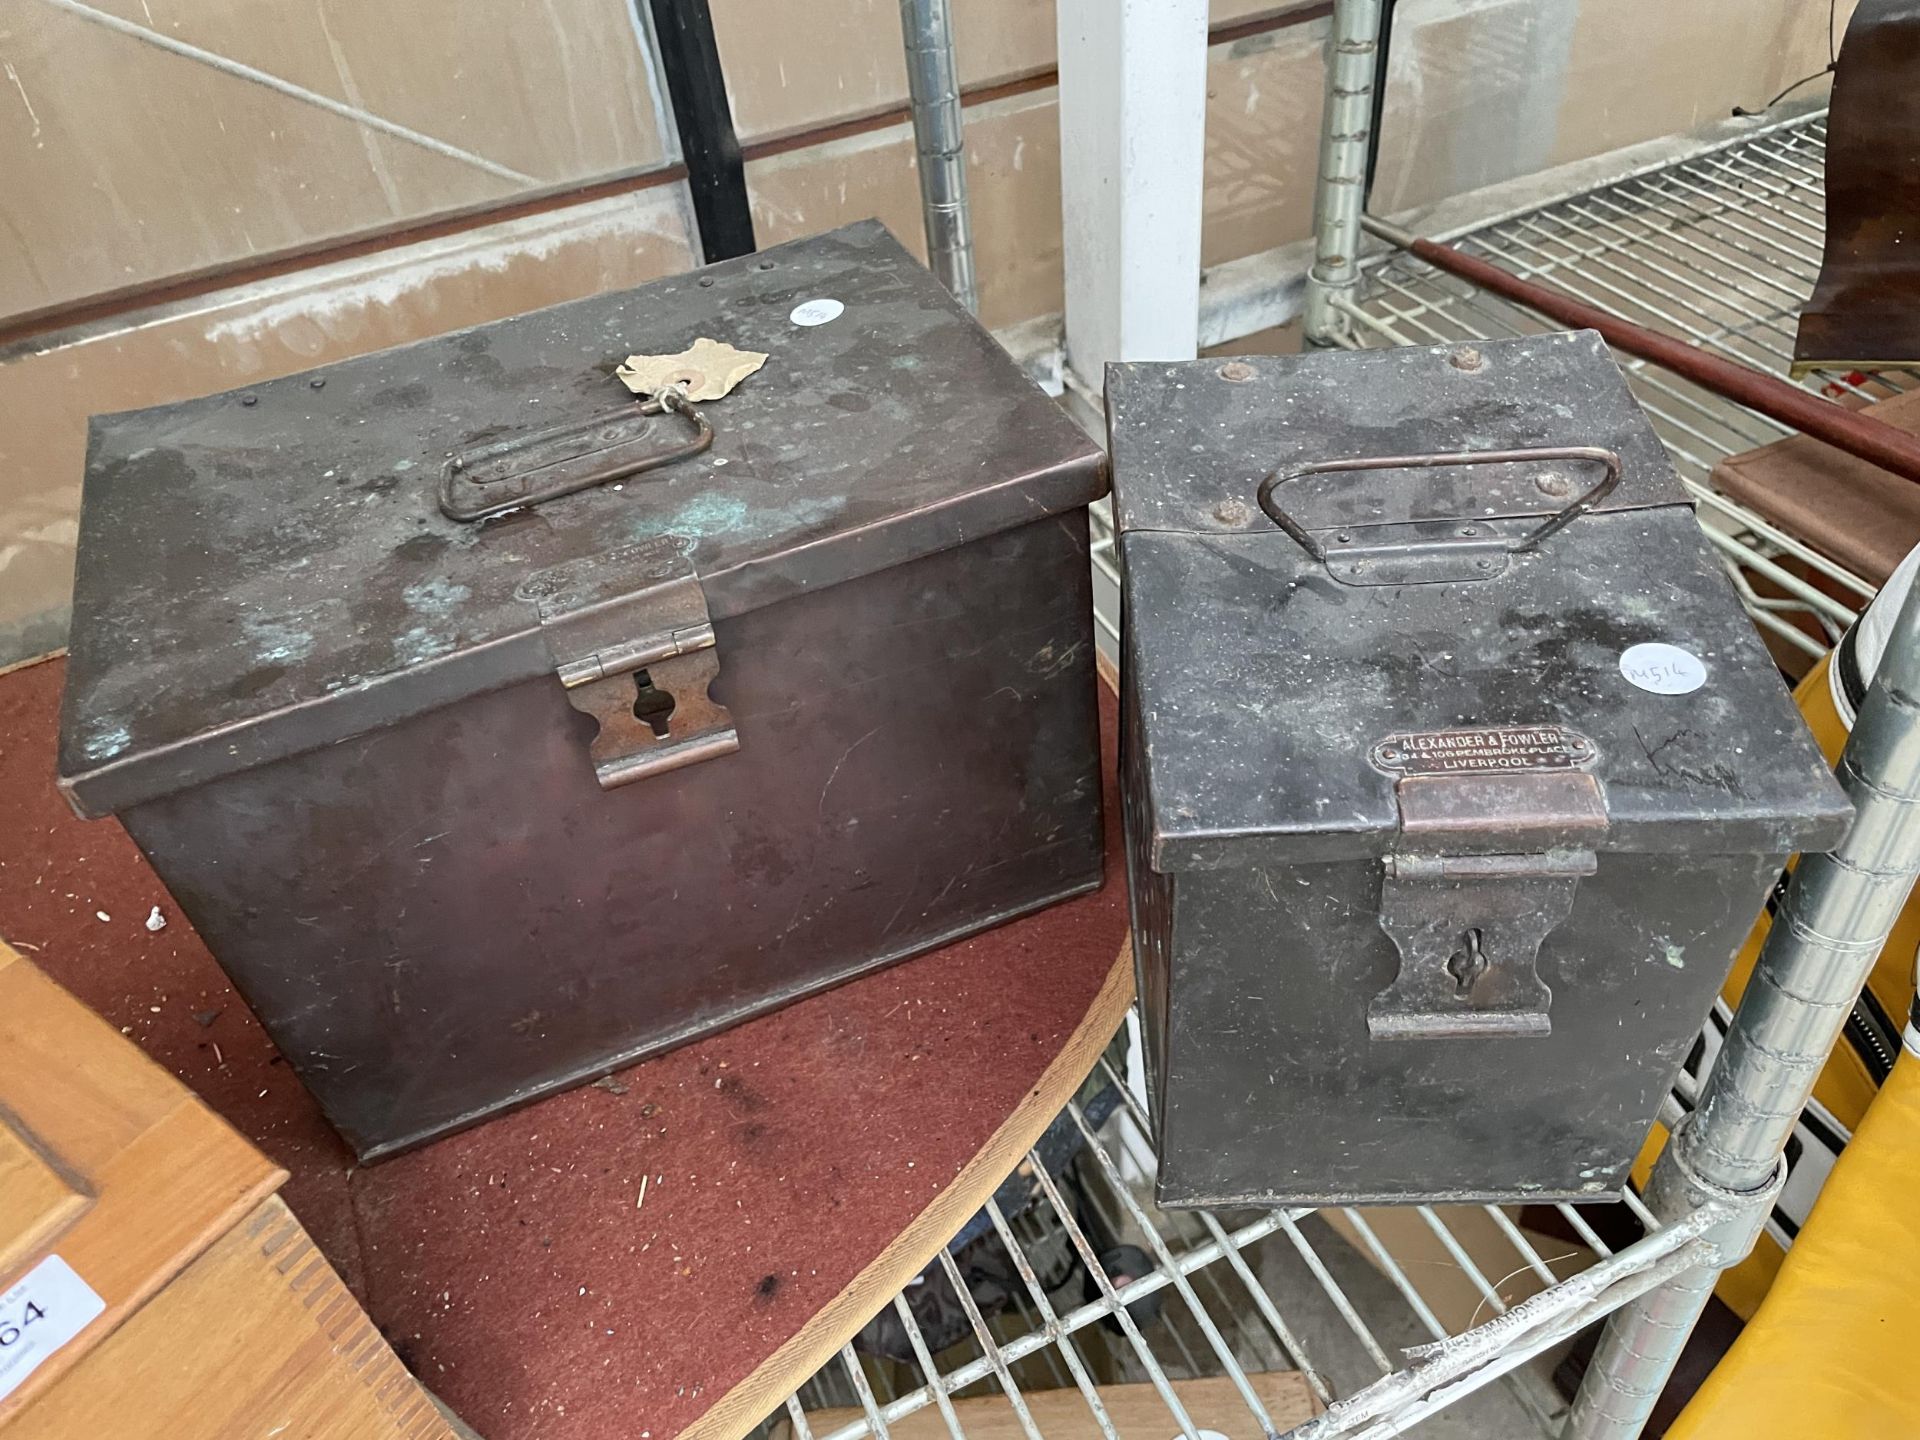 TWO METAL HOSPITAL BOXES AND A WOODEN KODAK FILM TANK - Image 2 of 6